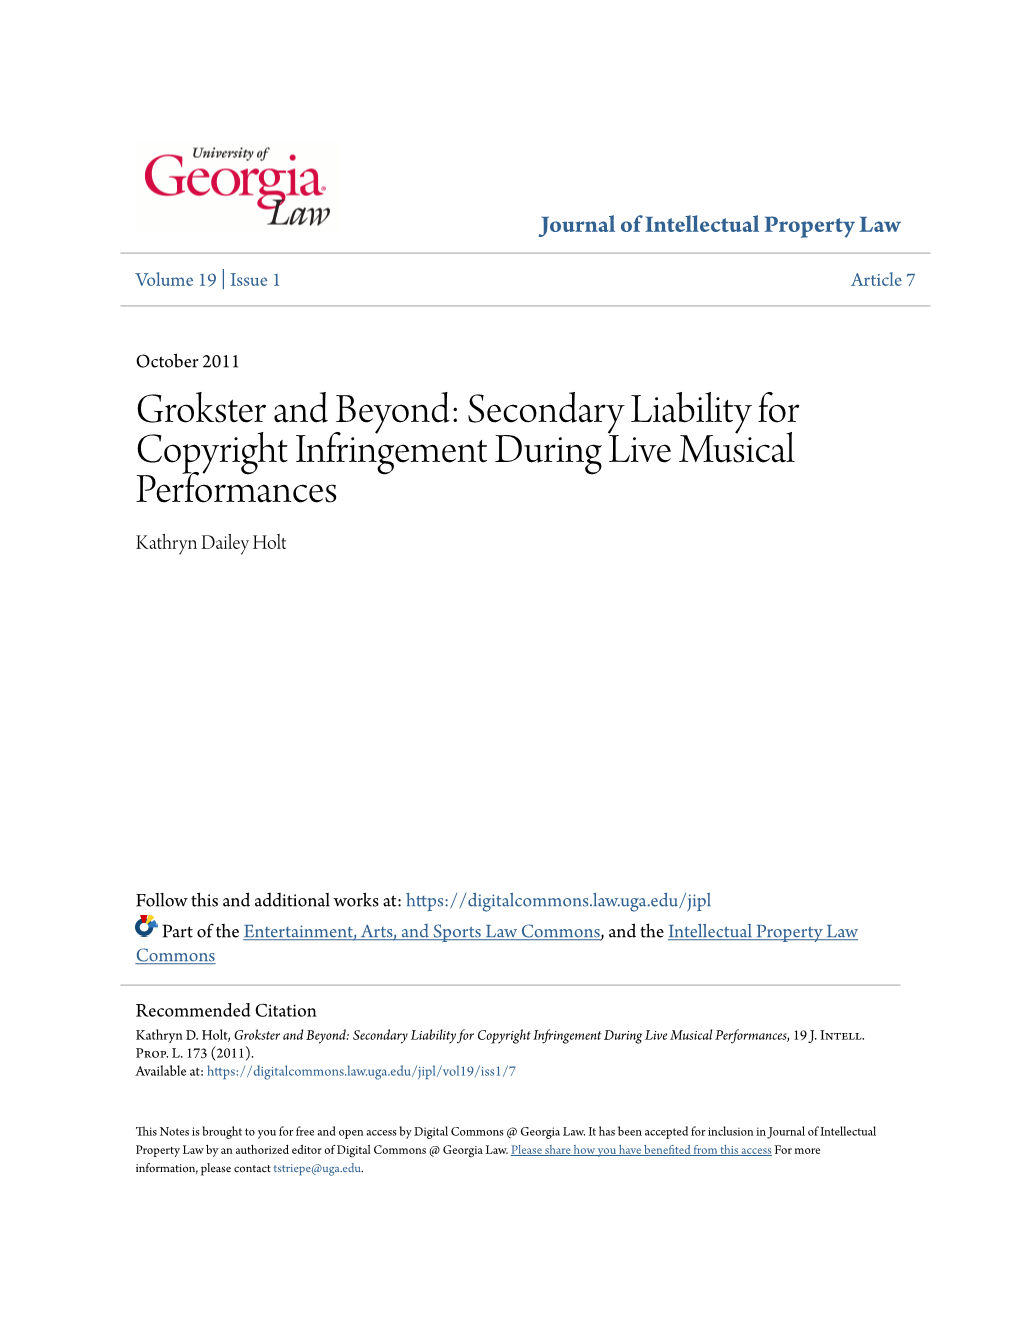 Grokster and Beyond: Secondary Liability for Copyright Infringement During Live Musical Performances Kathryn Dailey Holt